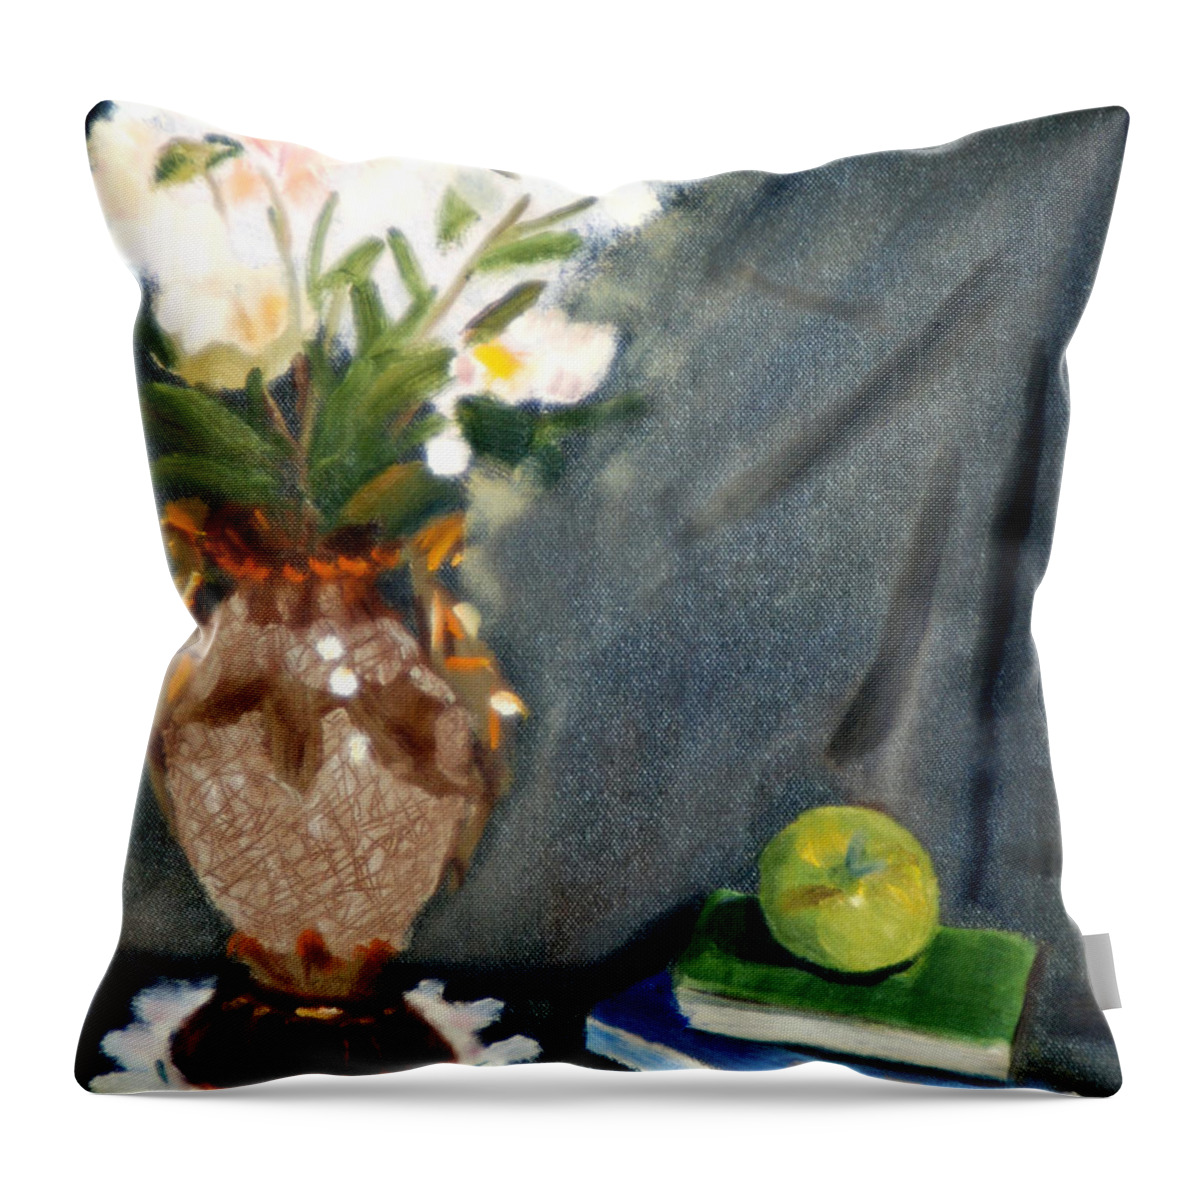 Vase Throw Pillow featuring the painting Antique Vase and Flower by Michael Daniels